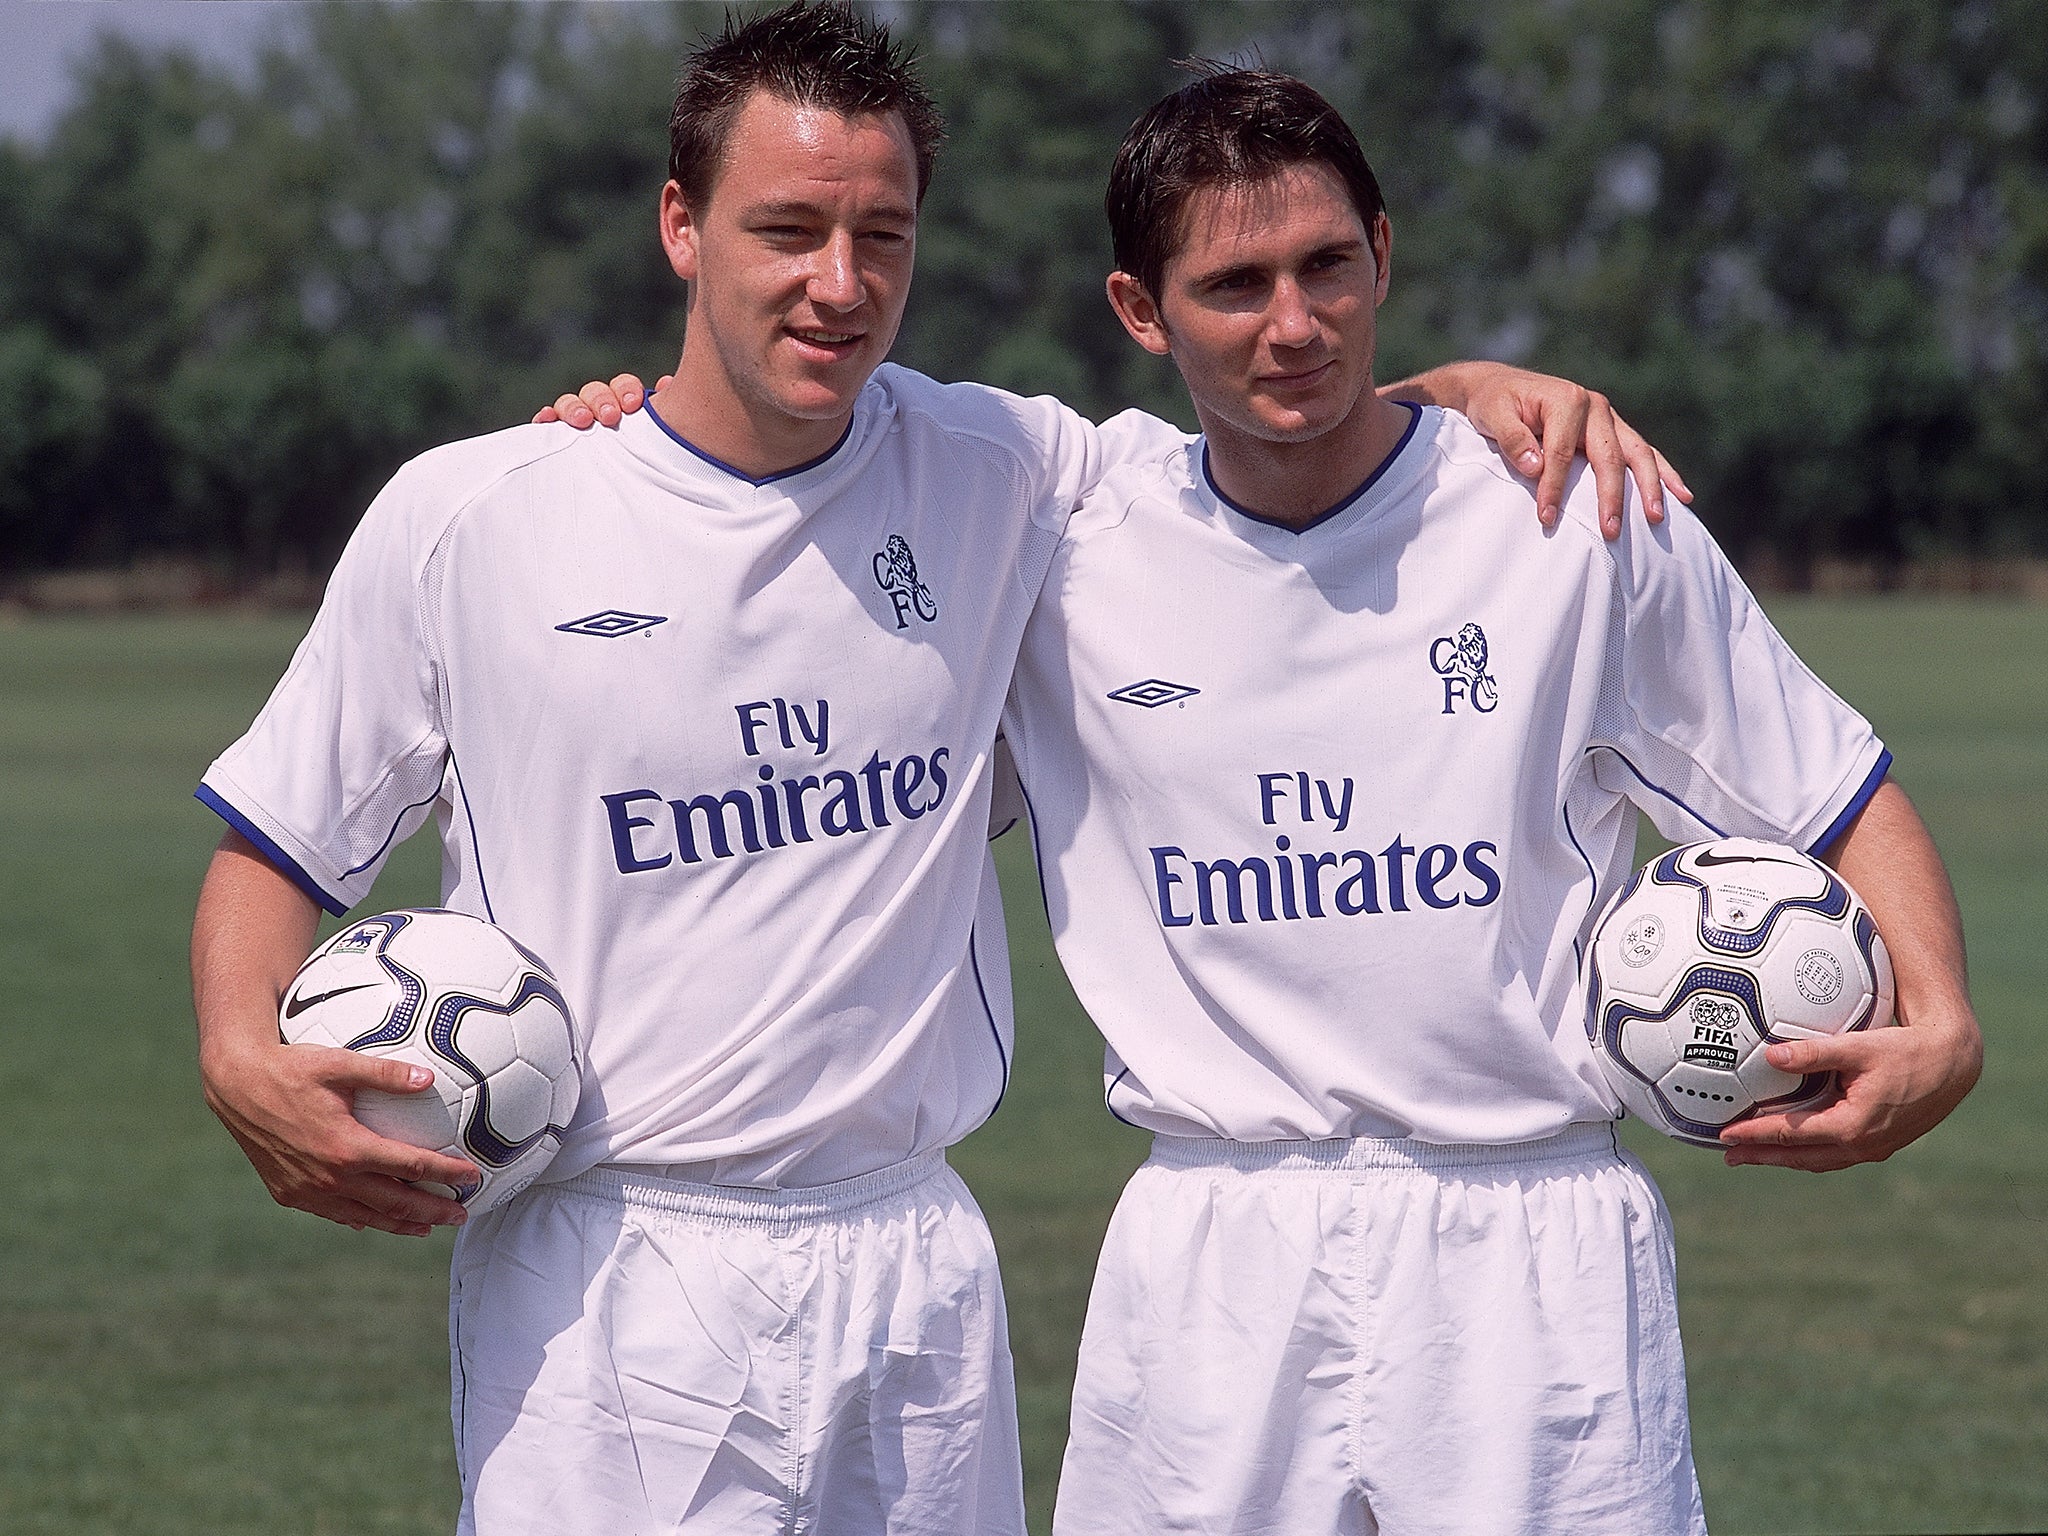 Frank Lampard and John Terry pictured together in 2001